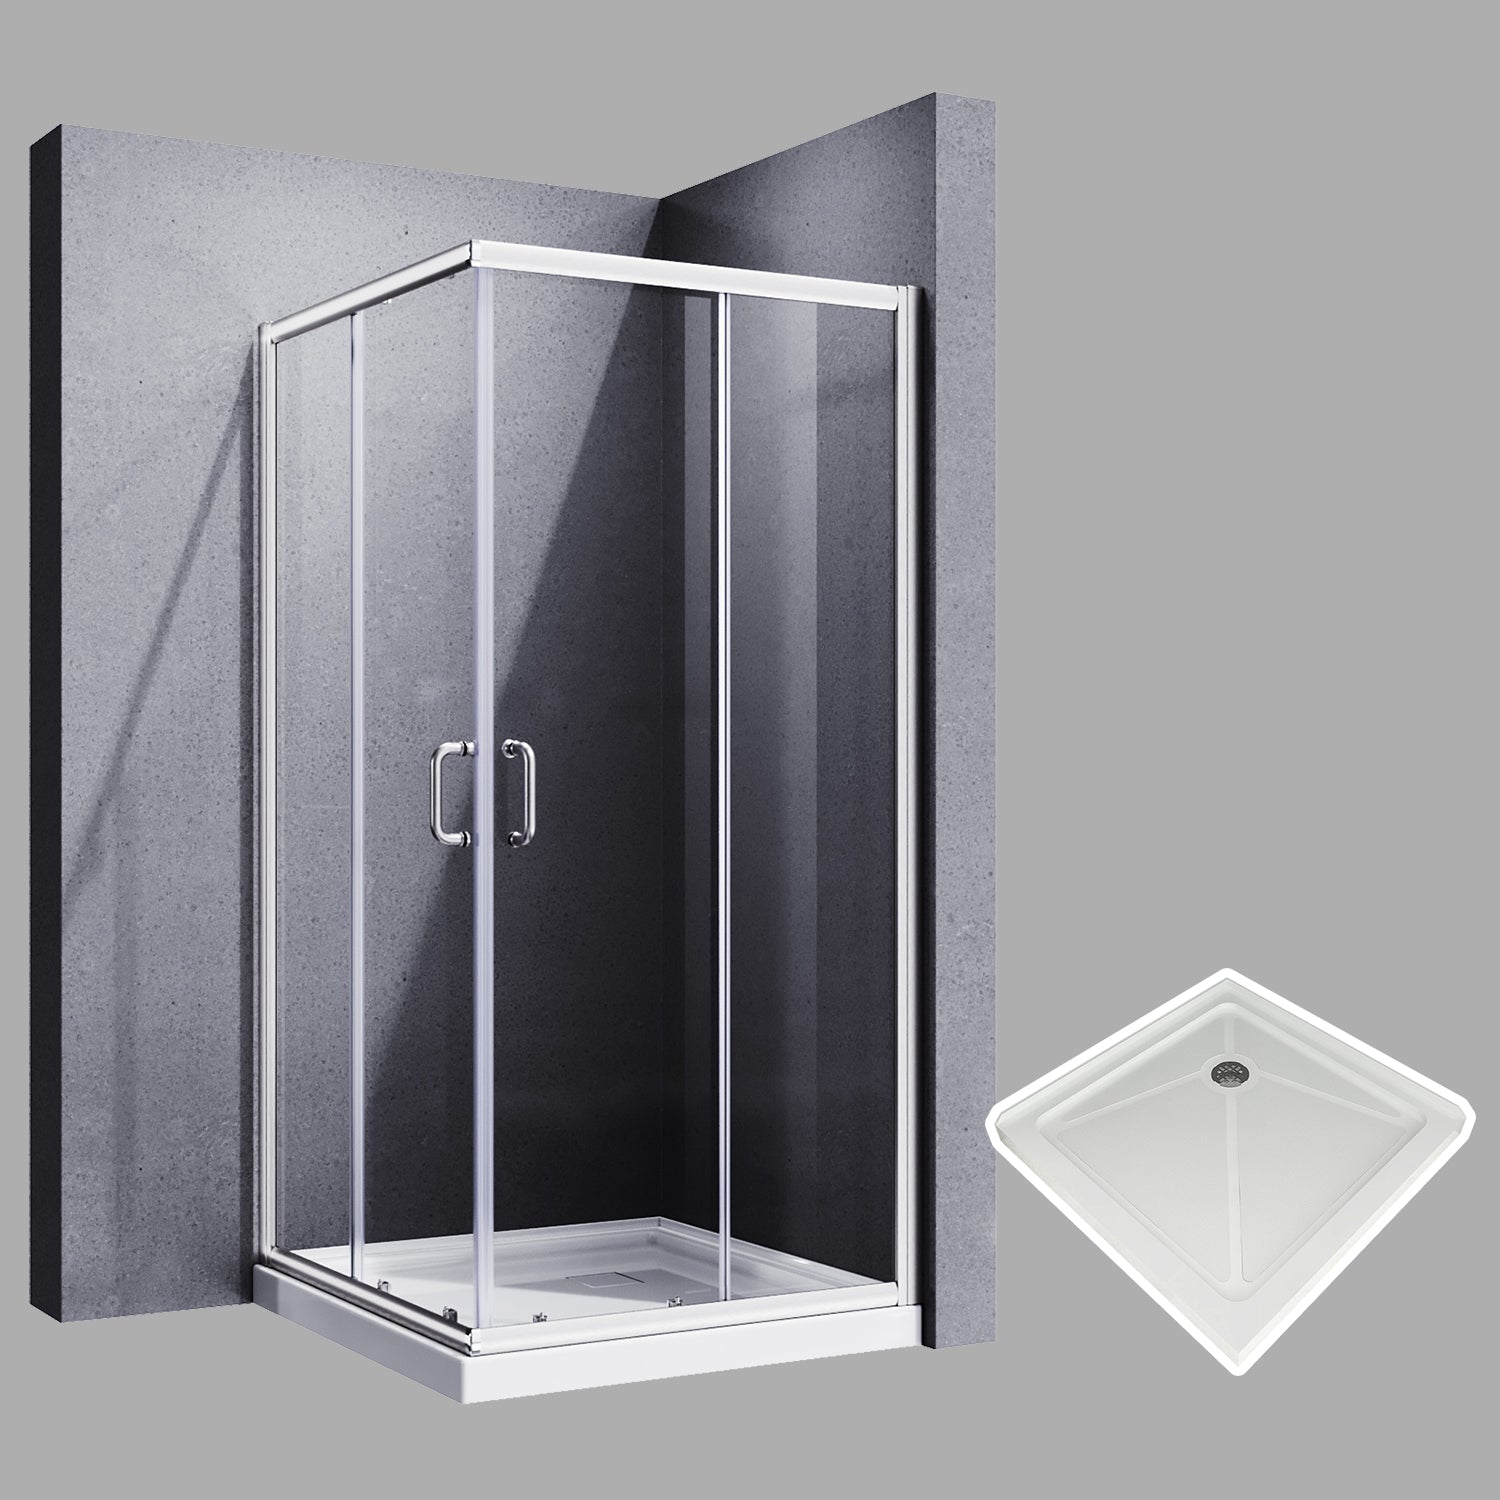 Sunny Shower 34 in. W x 34 in. D x 72 in. H Corner Entry Enclosure with Sliding Doors, 34 in. W x 34 in. D x 72 in. H / Black Check